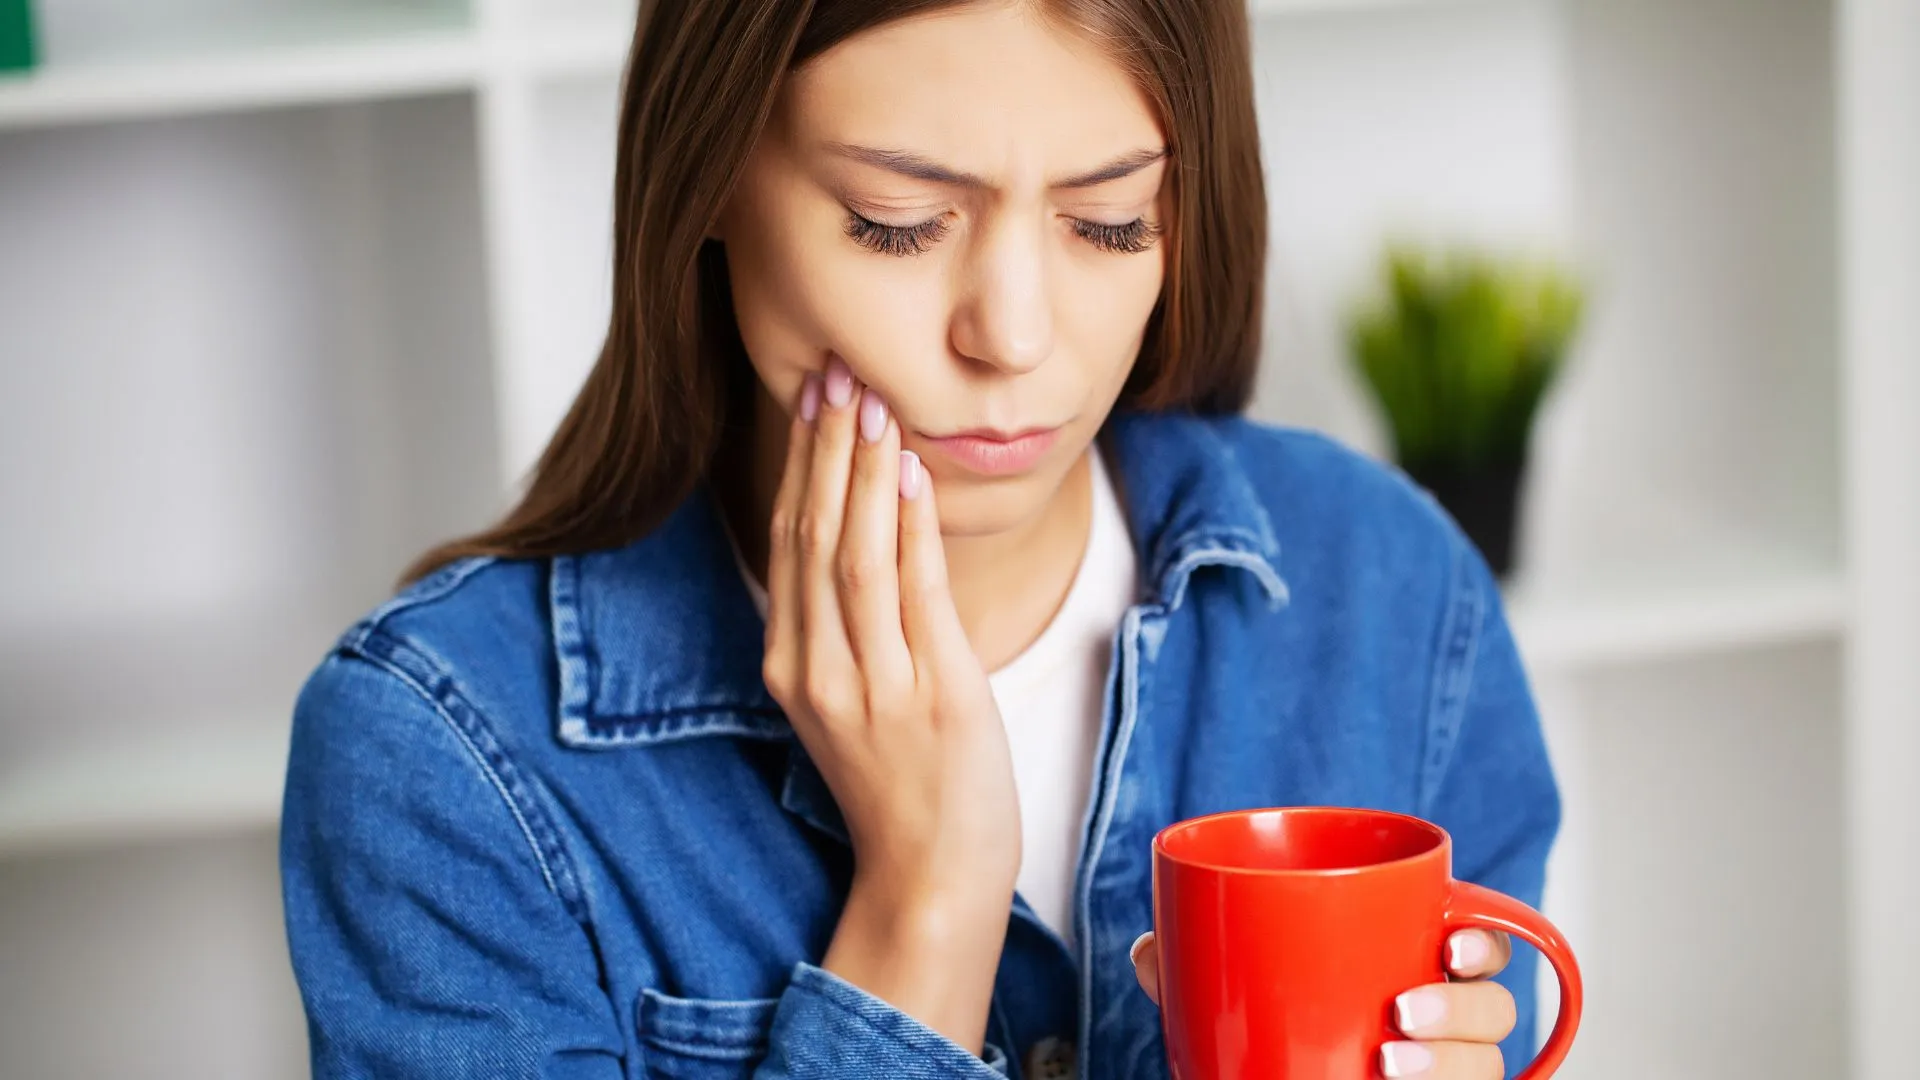 5 Effective Home Remedies for Sensitive Teeth